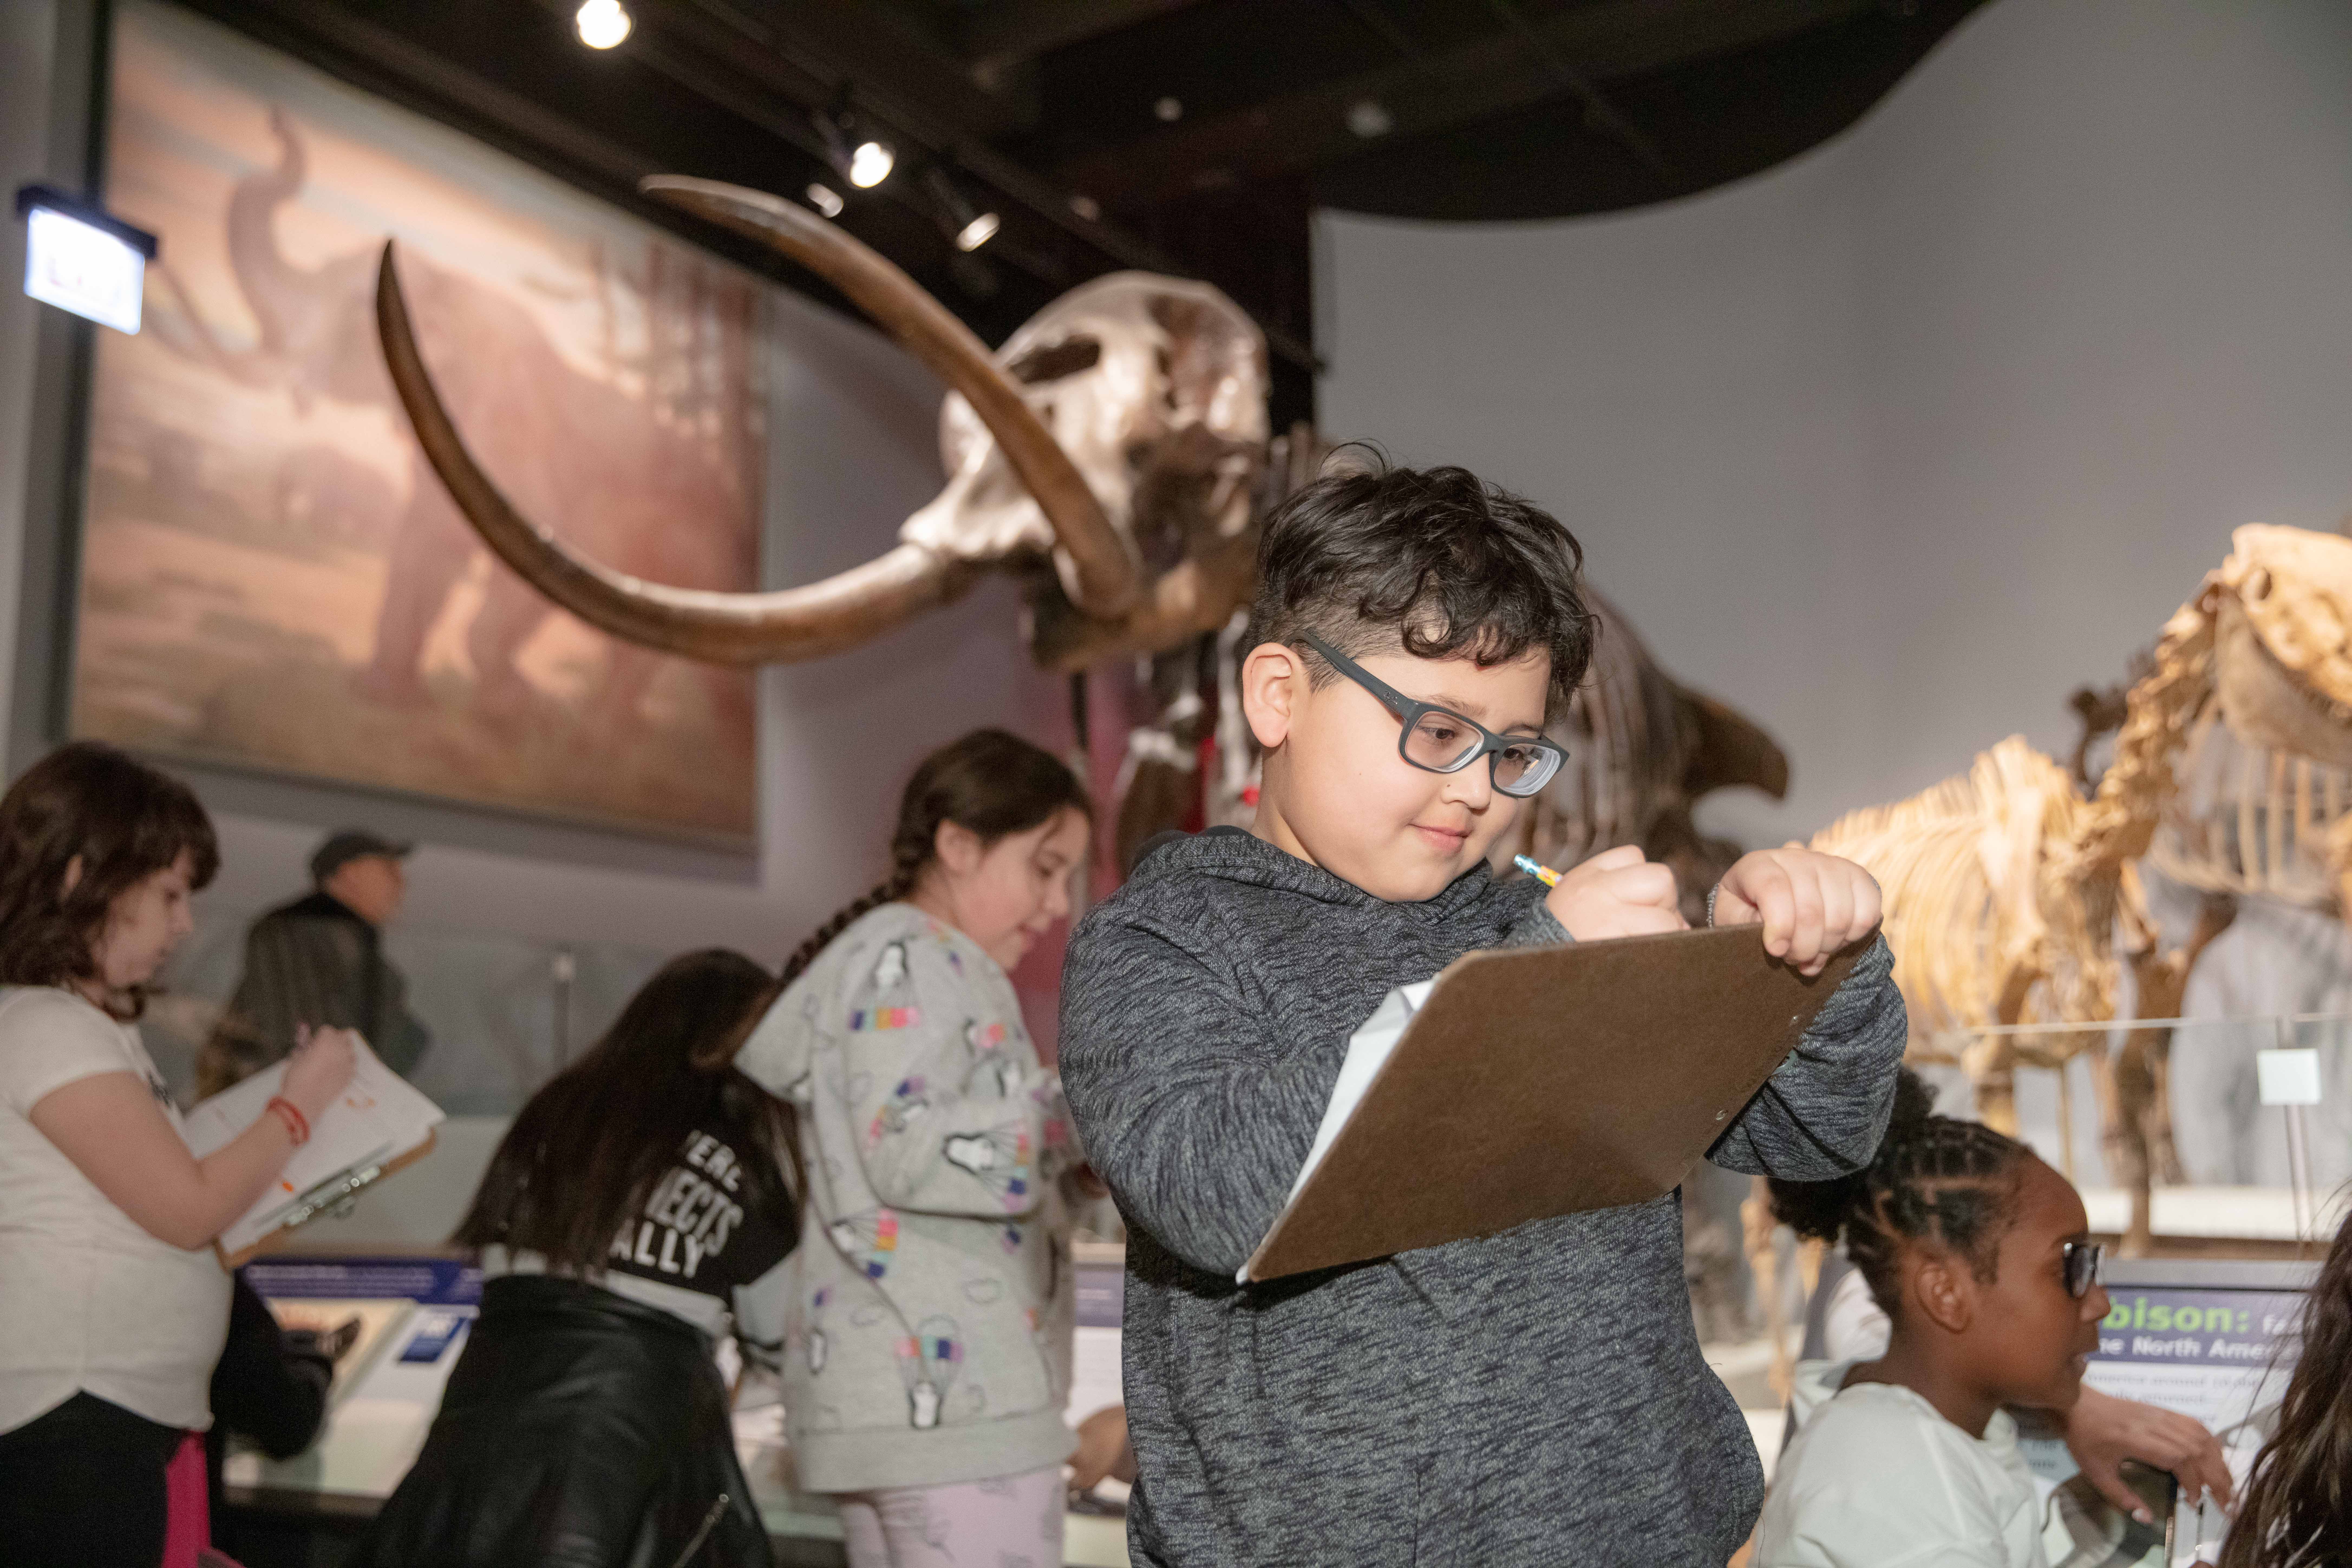 A young student writes on a clip board he is carrying through a museum exhibition. Other students and fossils can be seen in the background.